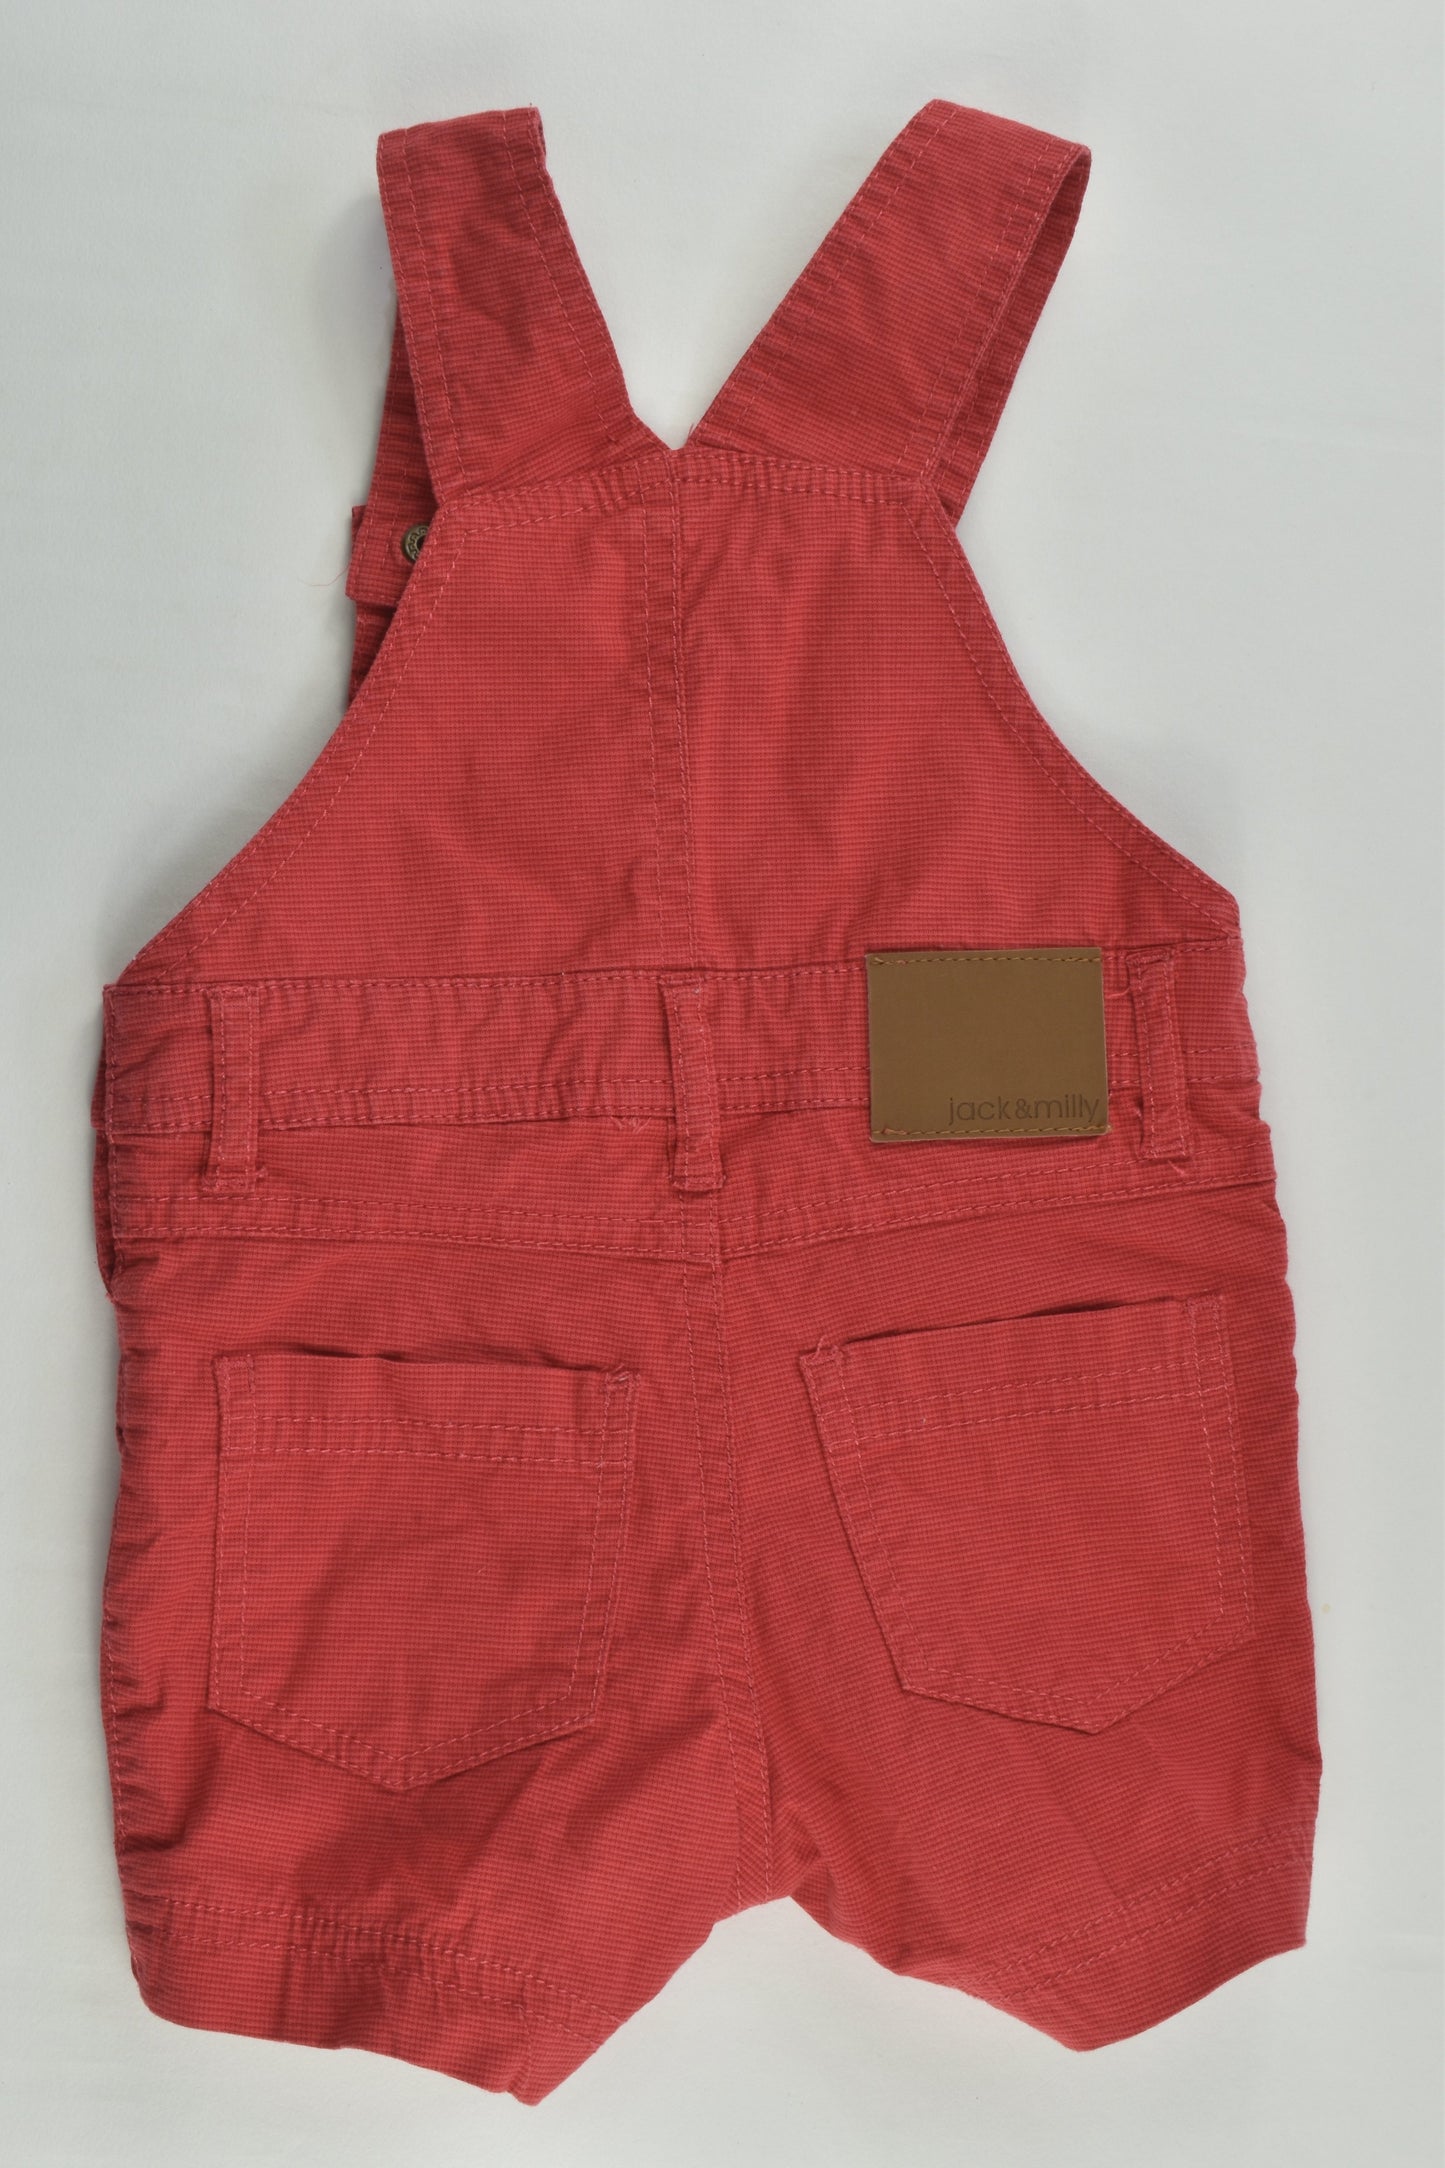 NEW Jack & Milly Size 000 Short Overalls